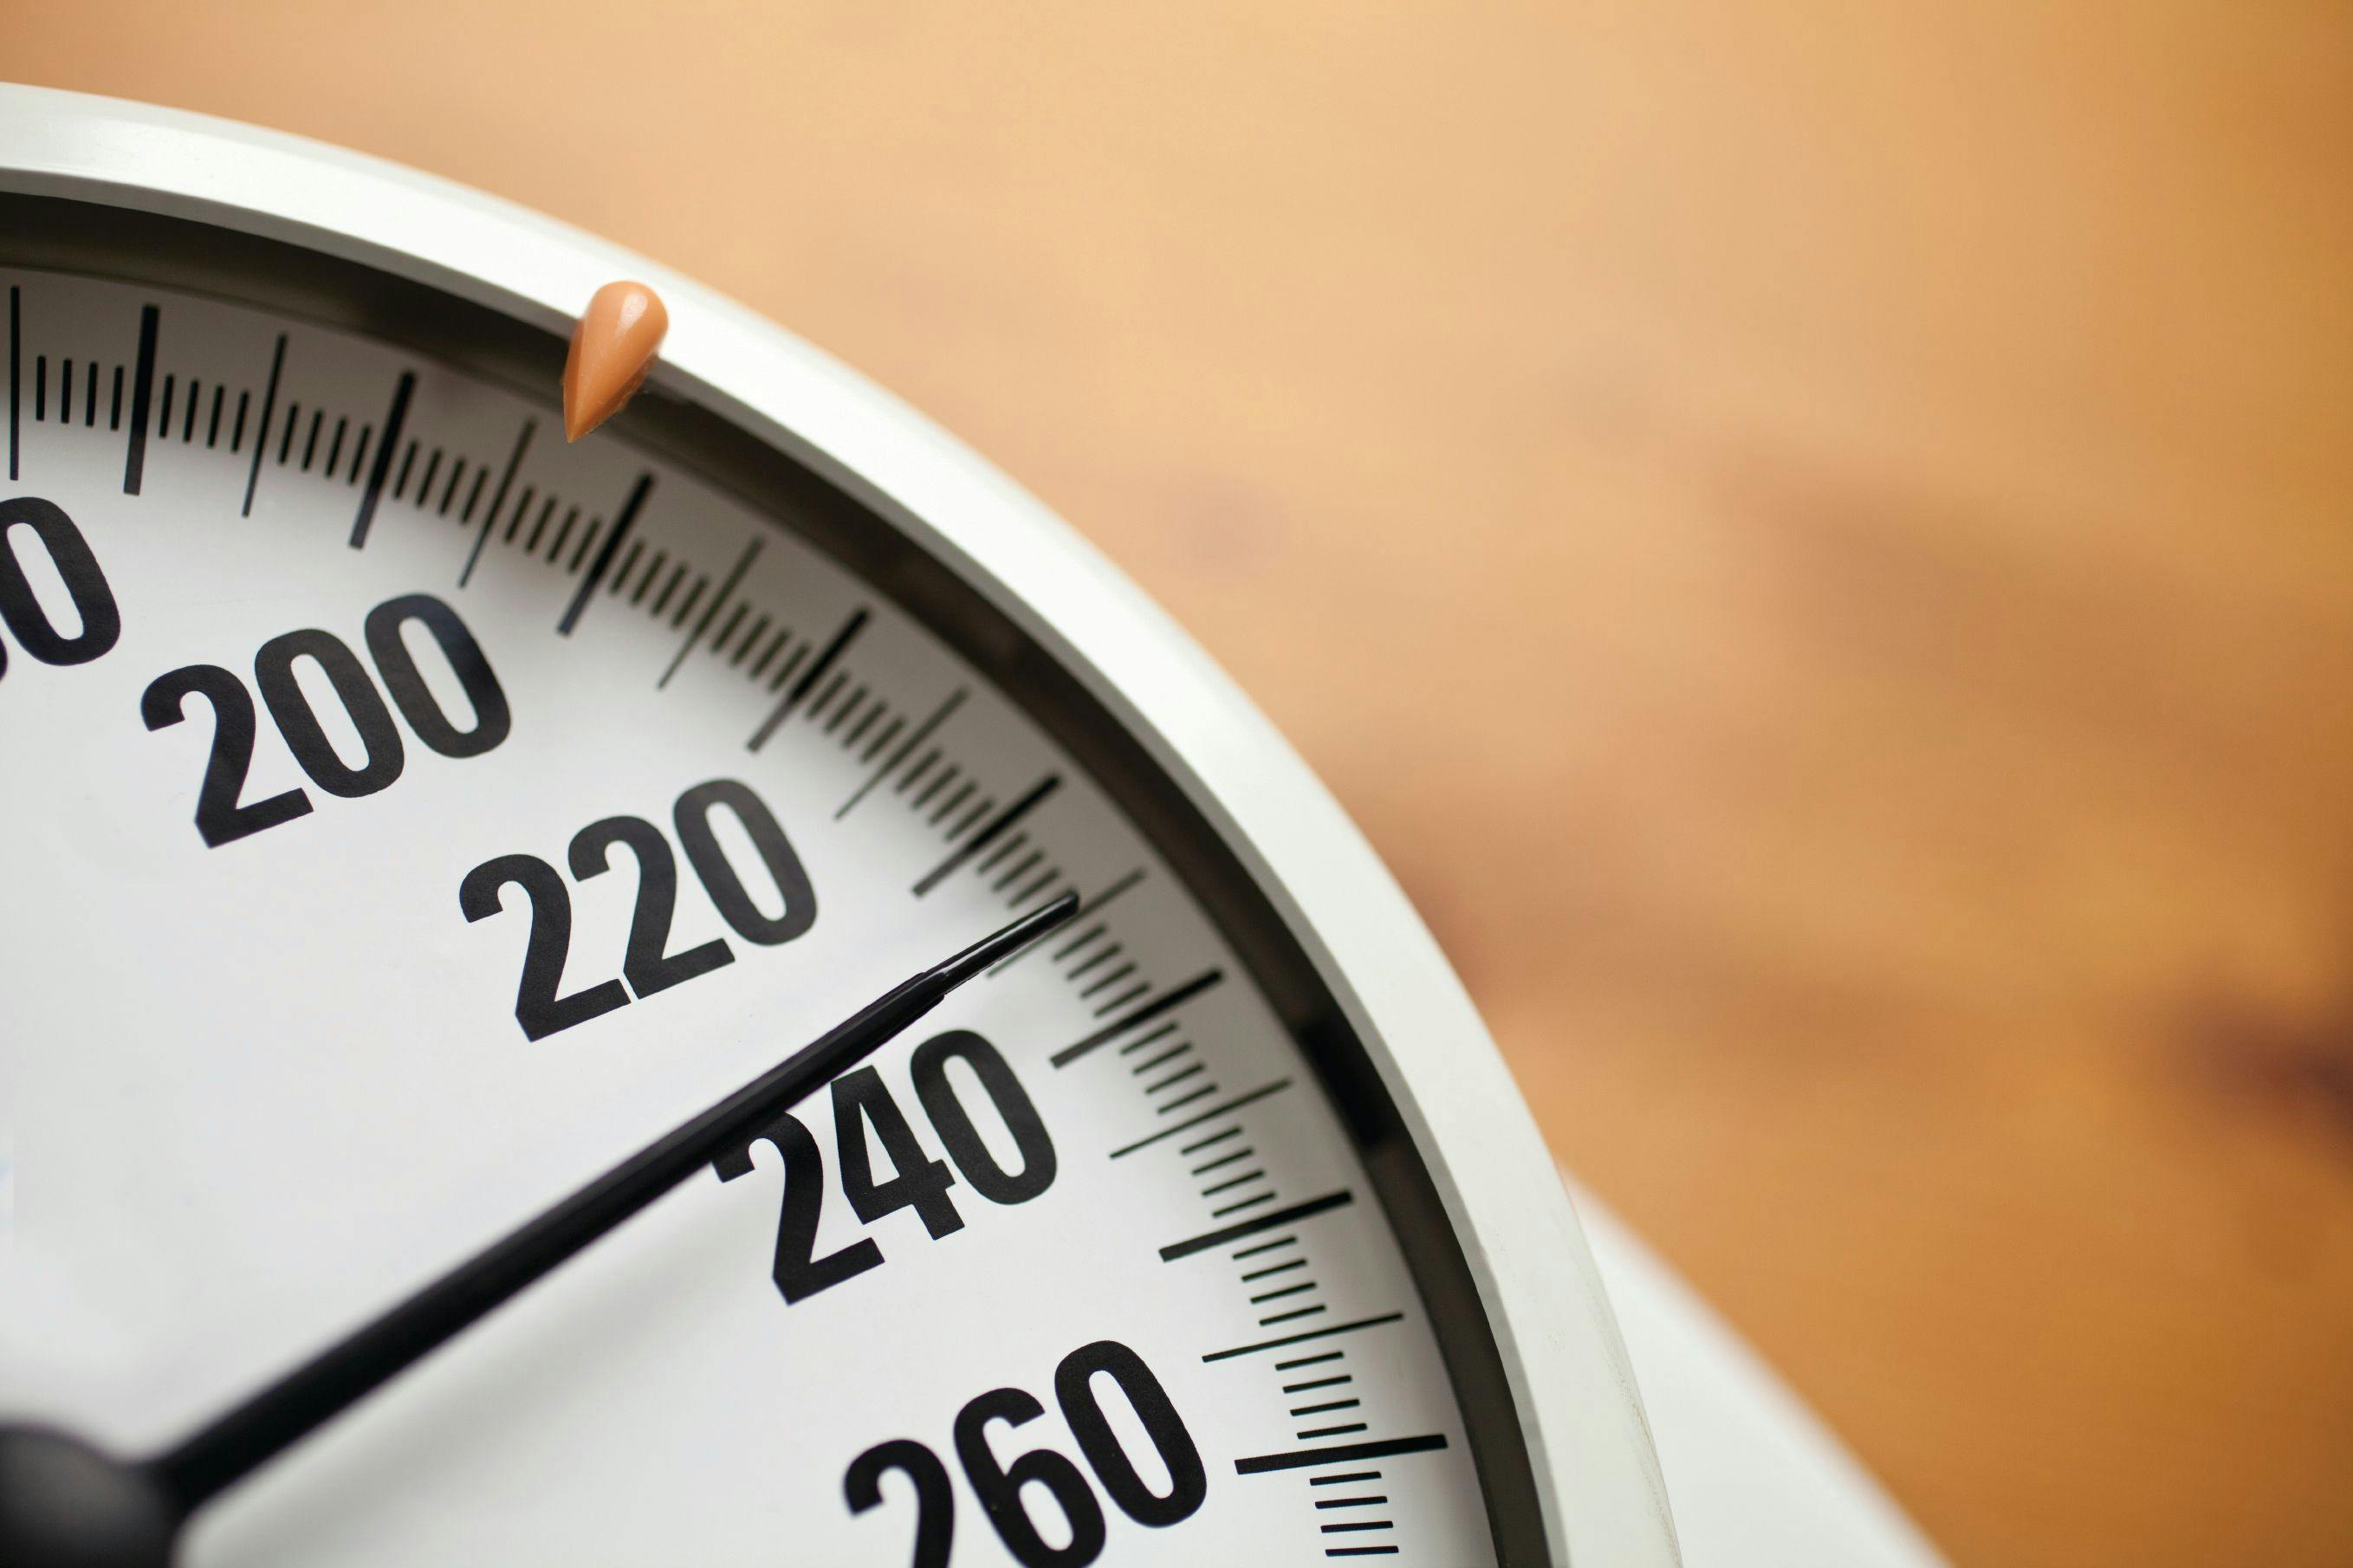 Stock imagery of a body weight scale. | Credit: iStock